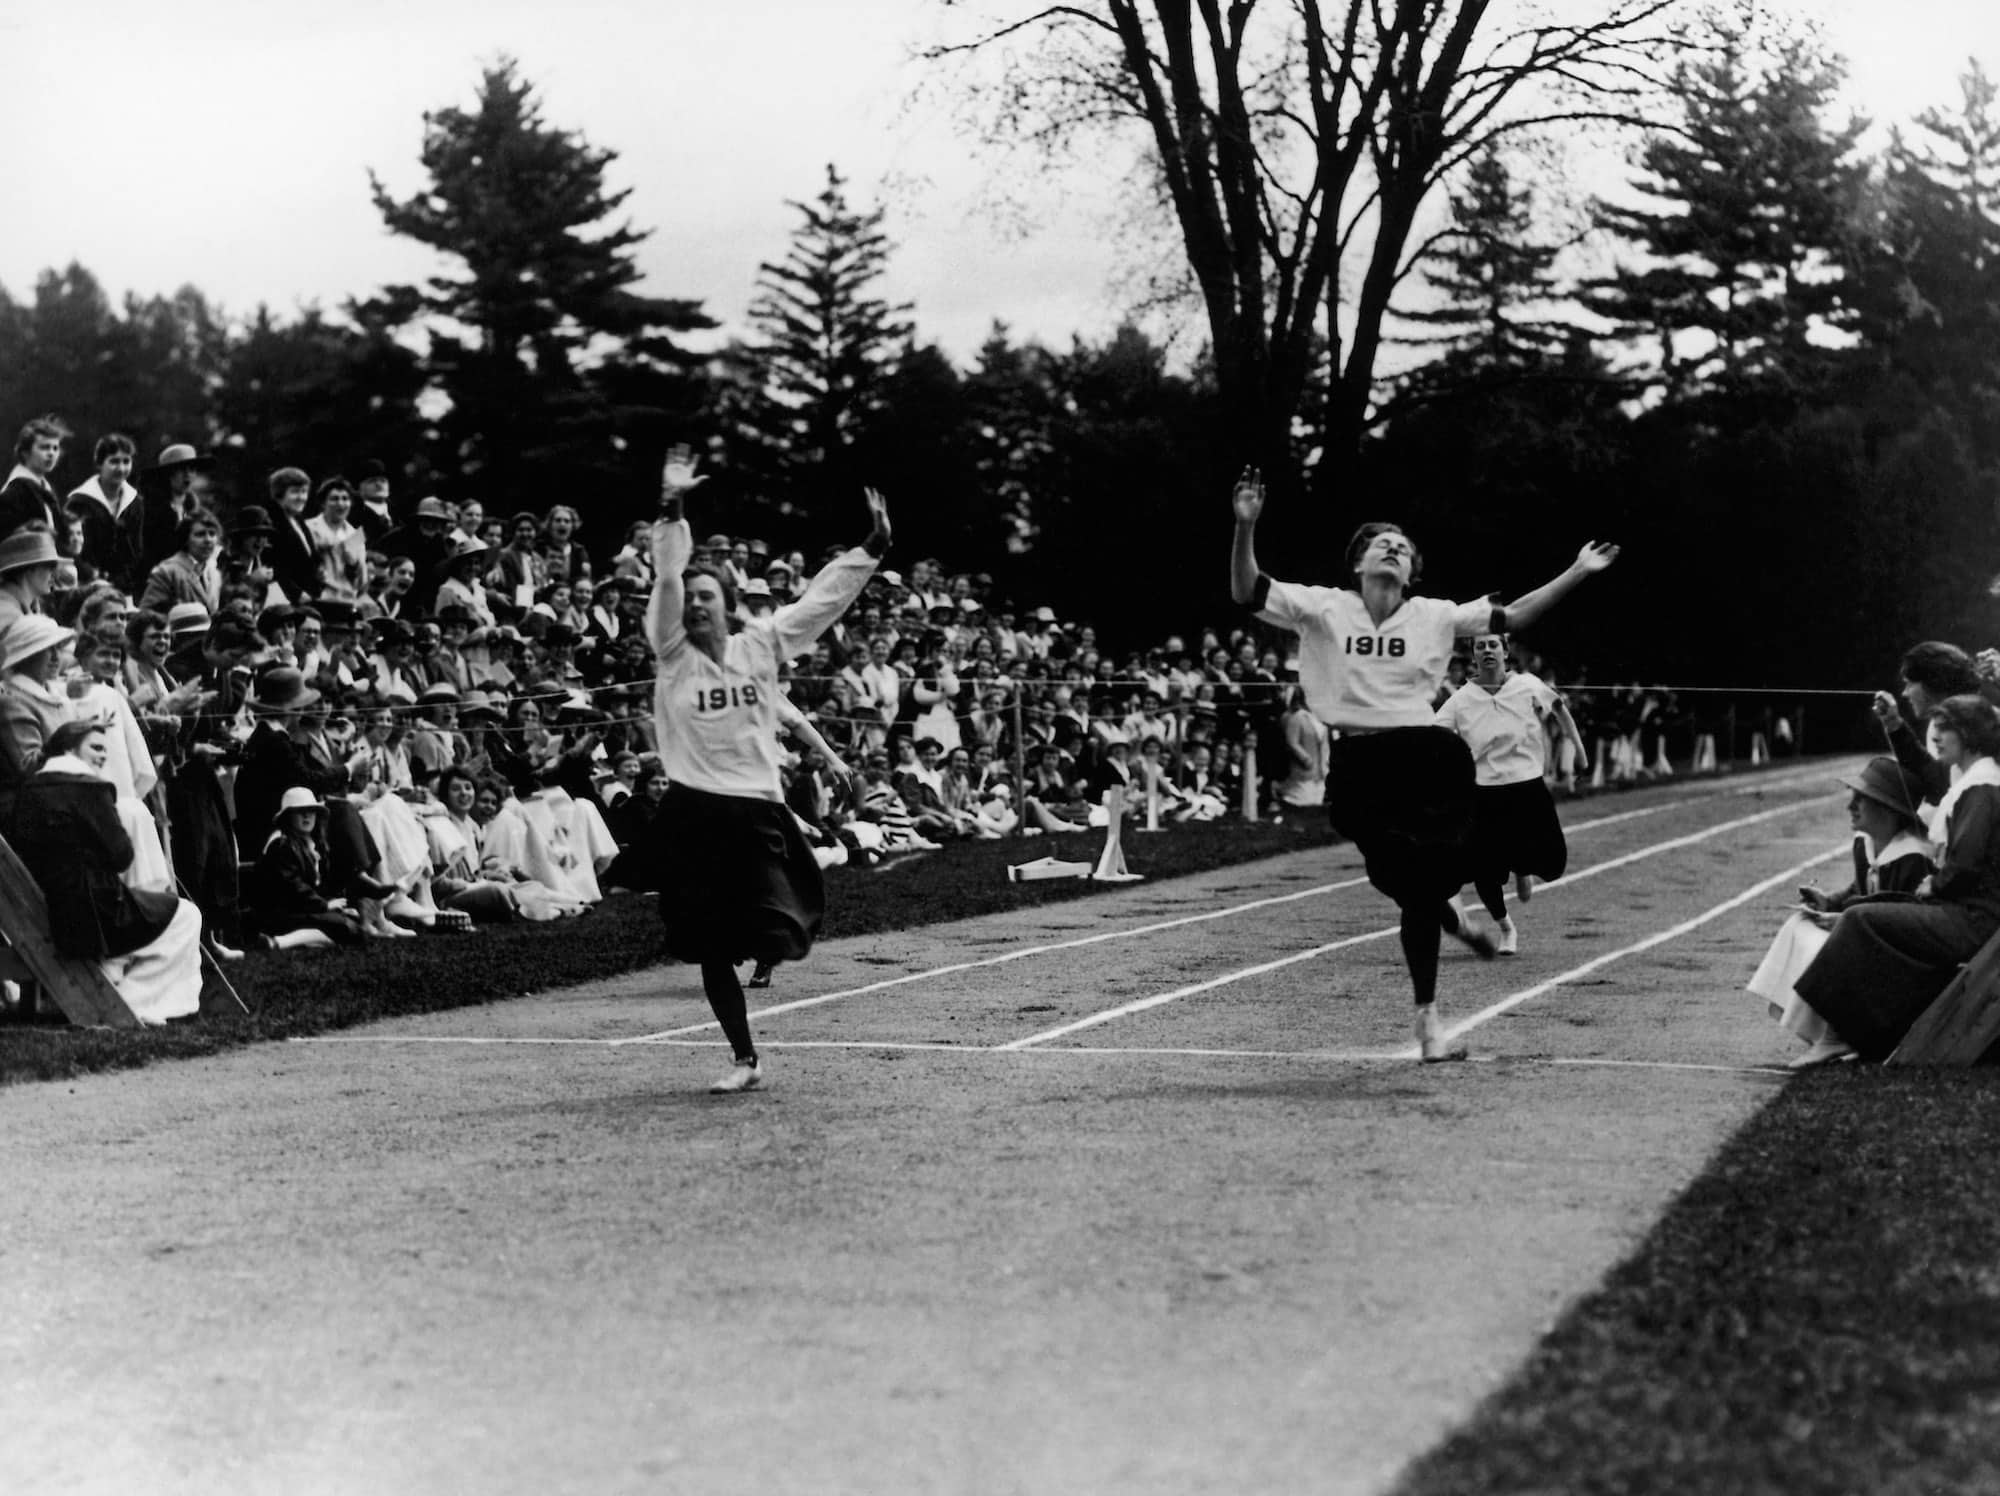 Historical black and white photo of two people sprinting across the finish line, hands in the air